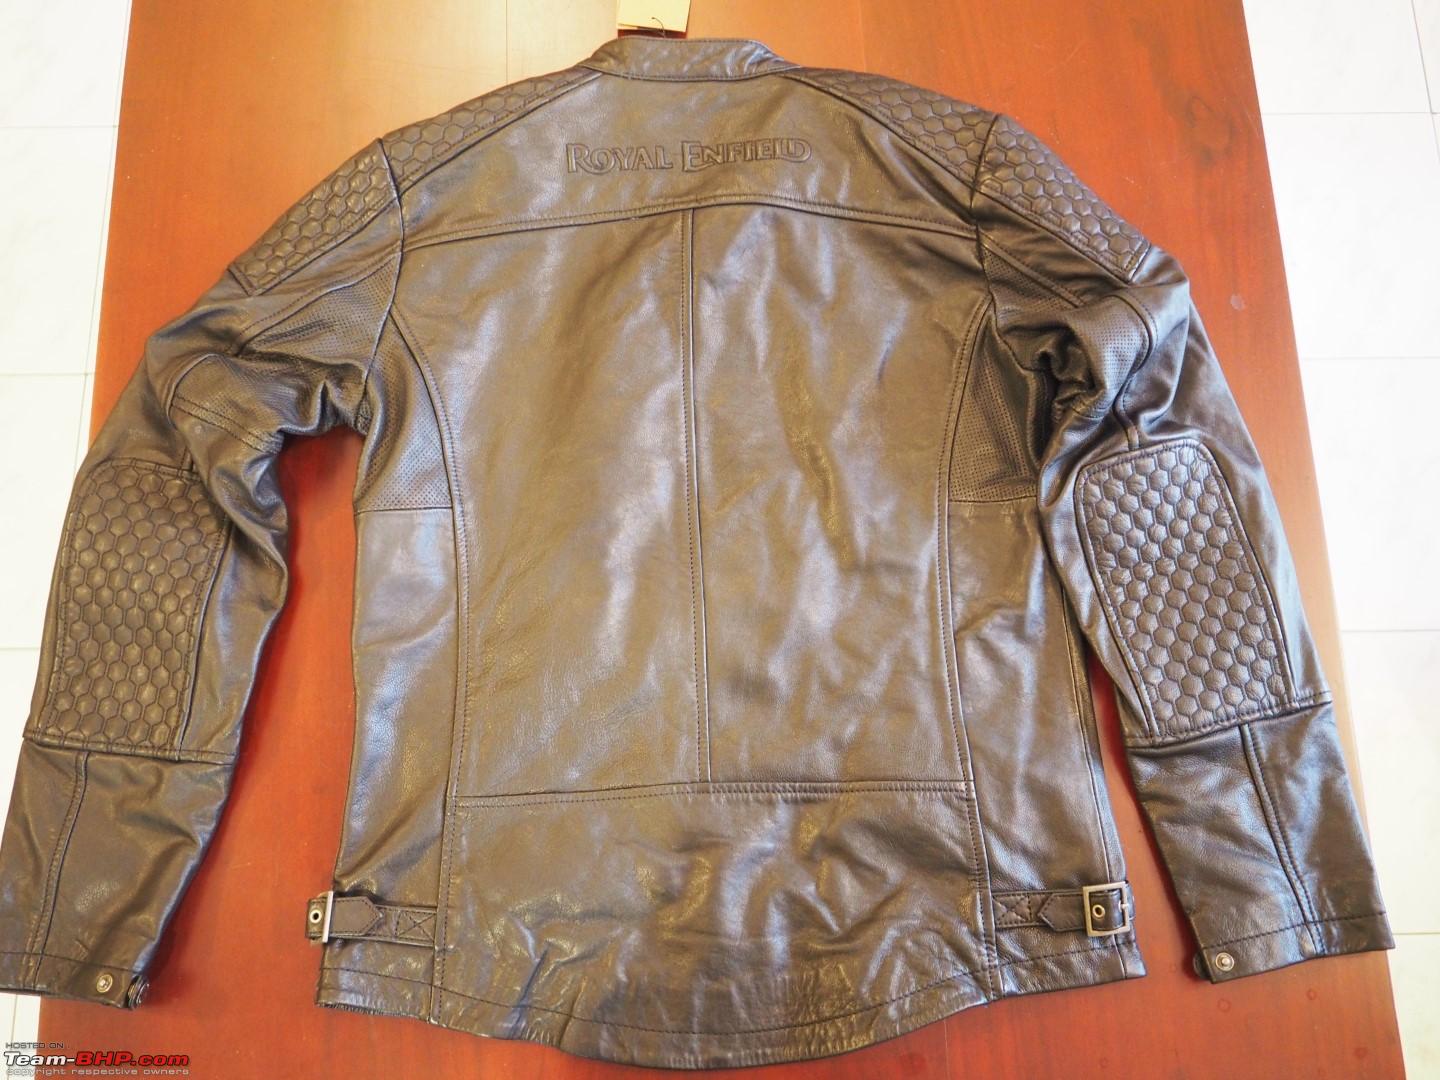 50% OFF on Motorev Body Cover Jacket For Royal Enfield Bullet 500 - Green  on Snapdeal | PaisaWapas.com